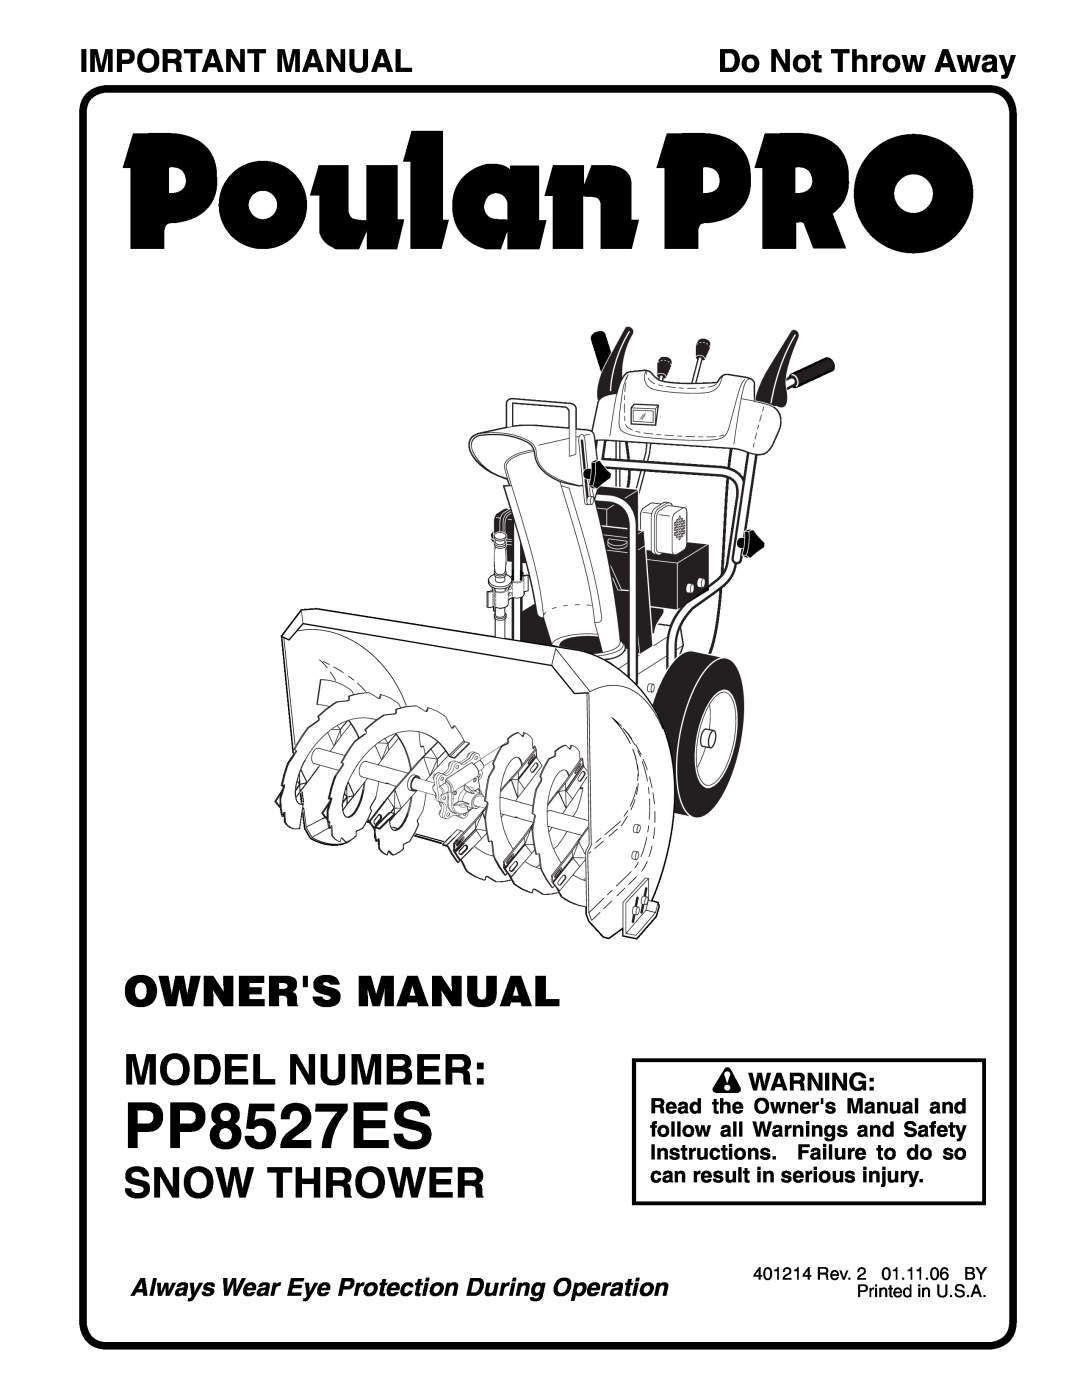 Poulan 401214, 96192000301 owner manual Snow Thrower, Important Manual, PP8527ES, Do Not Throw Away 